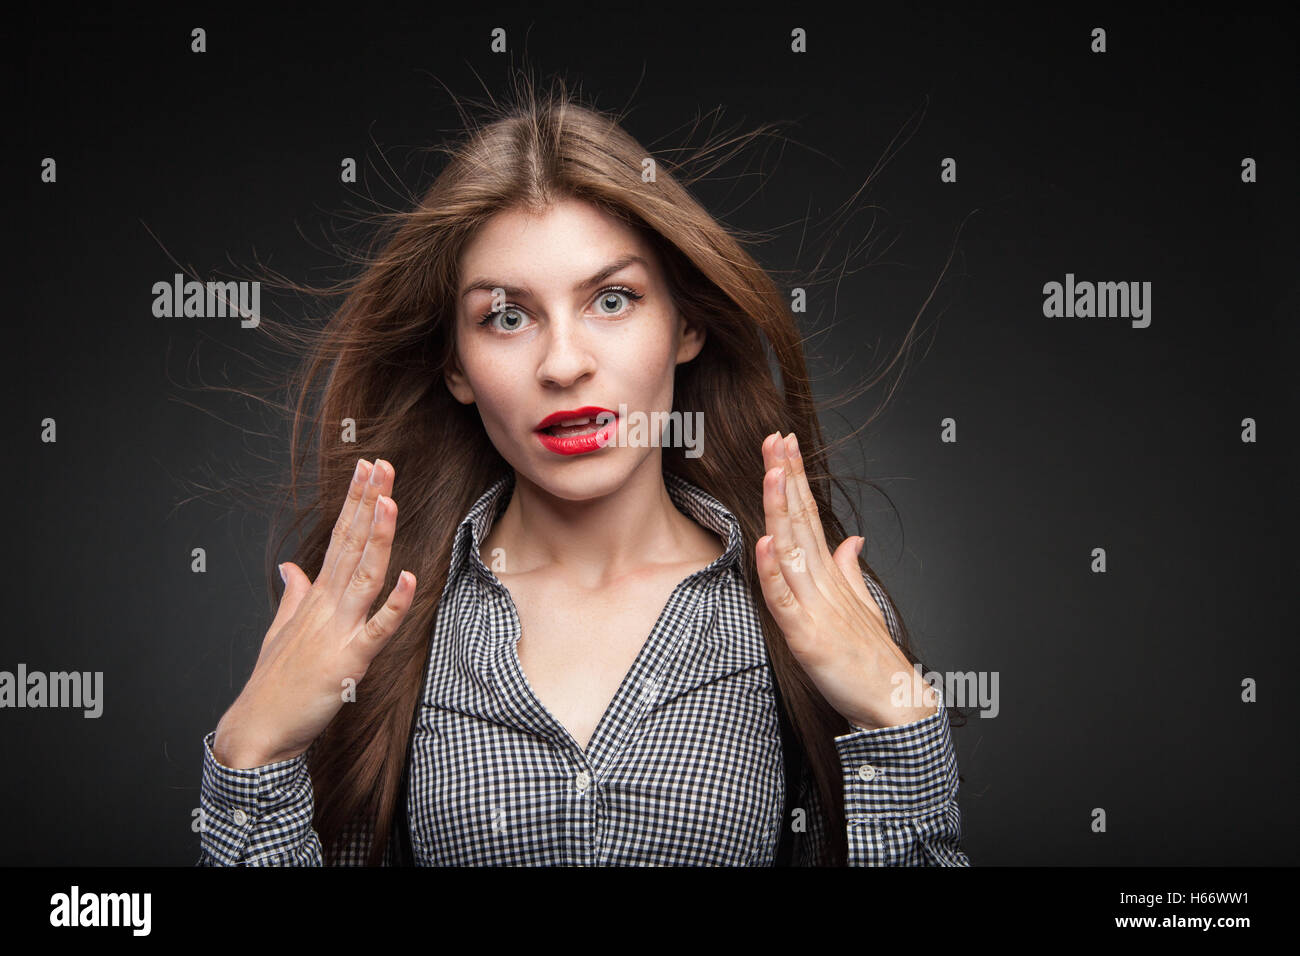 Surprised girl with wide opened eyes. Stock Photo